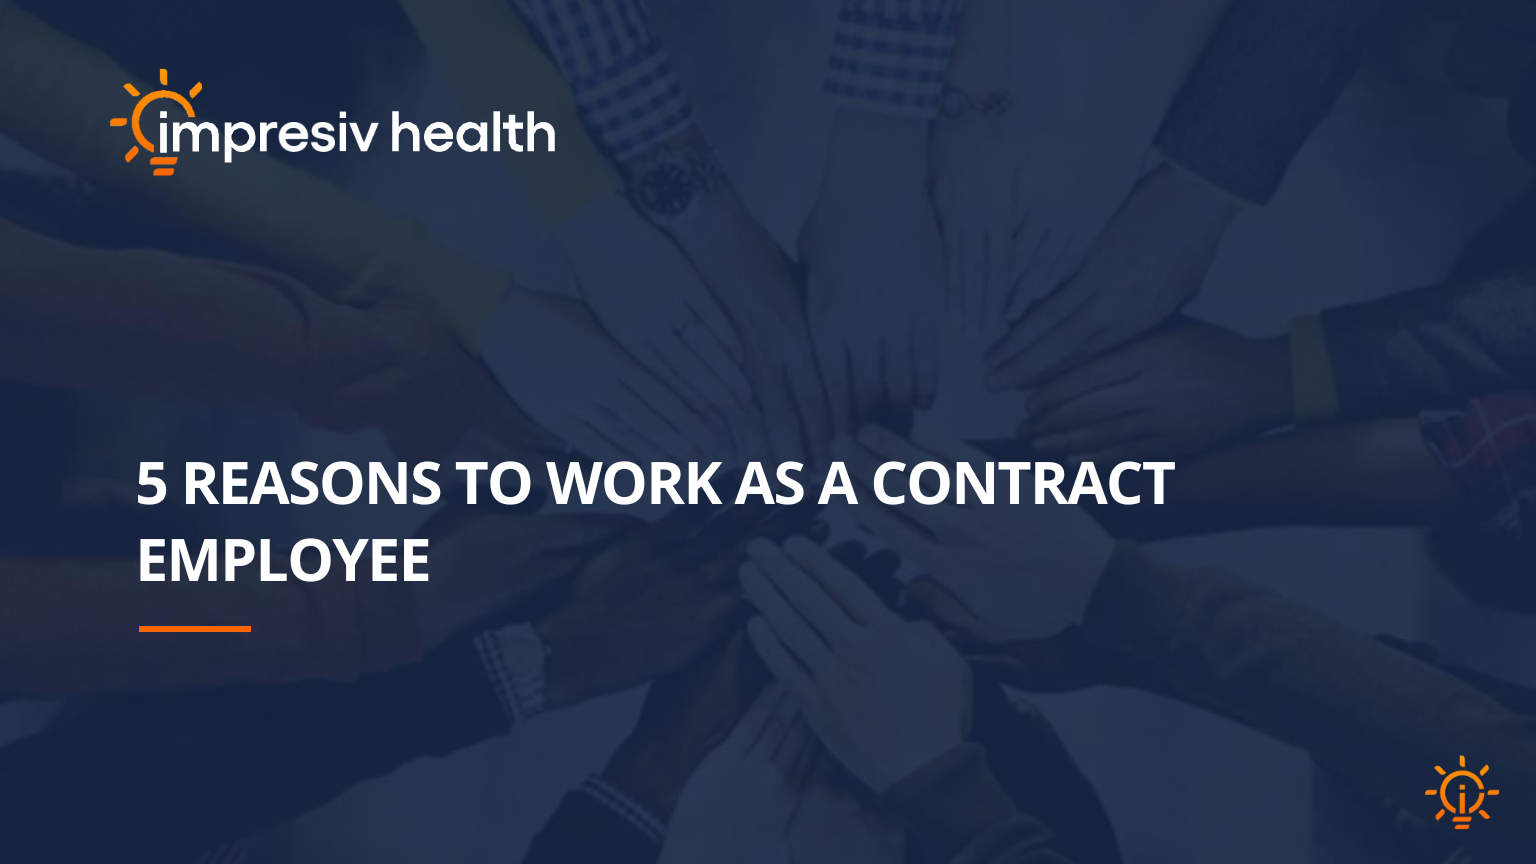 5 Reasons To Work As a Contract Employee